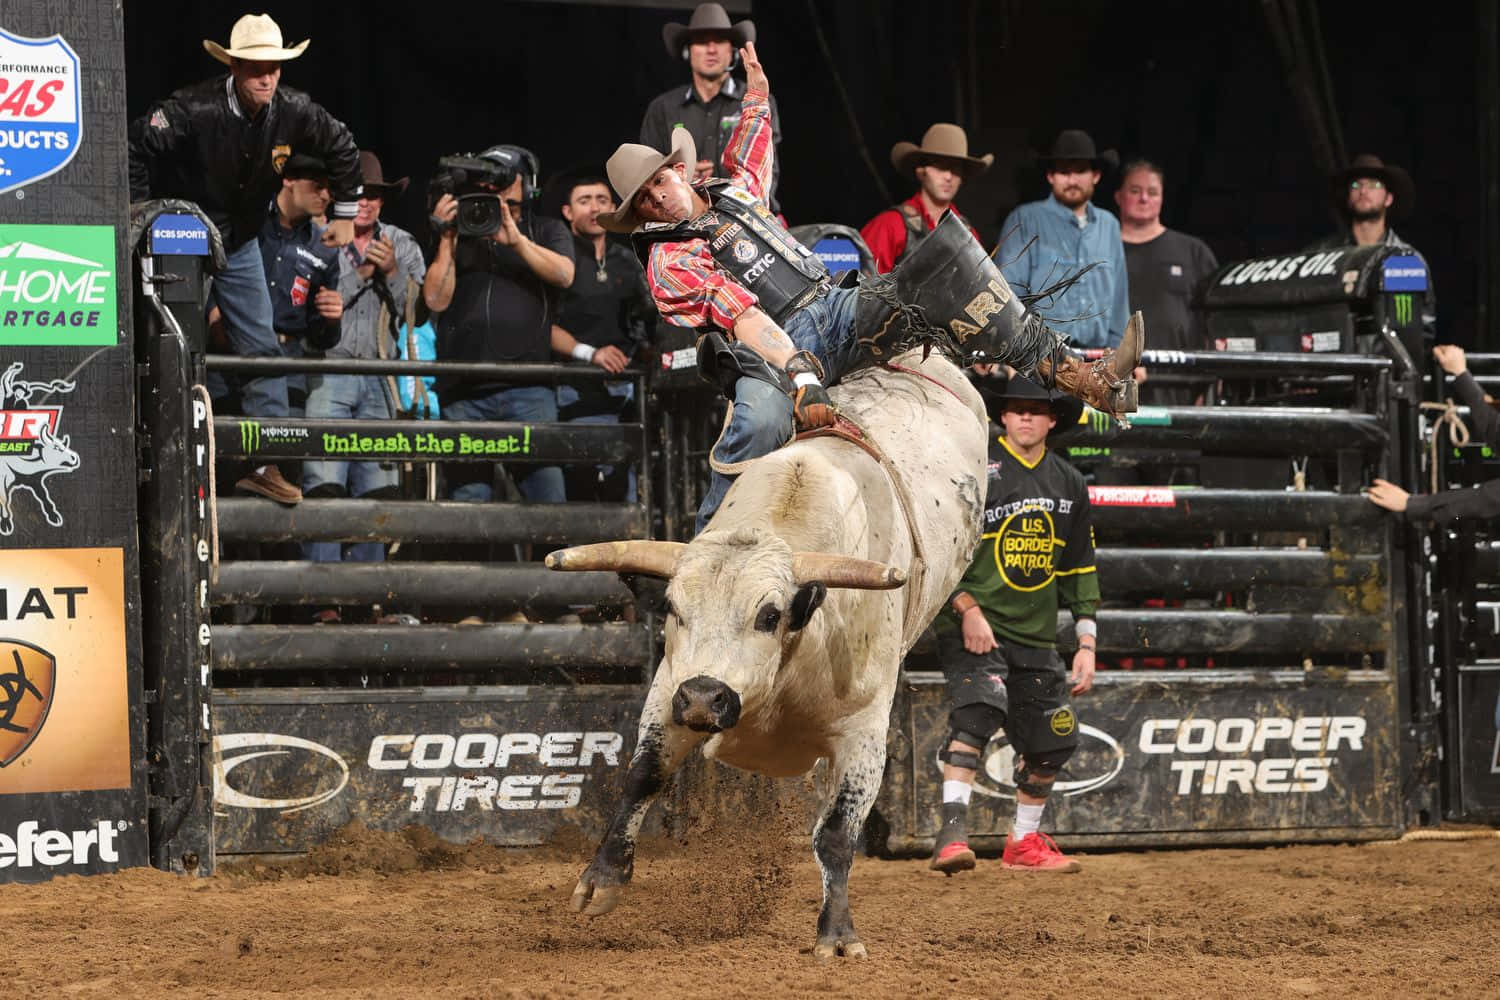 A Cowbow Showing his Skills in Bull Riding